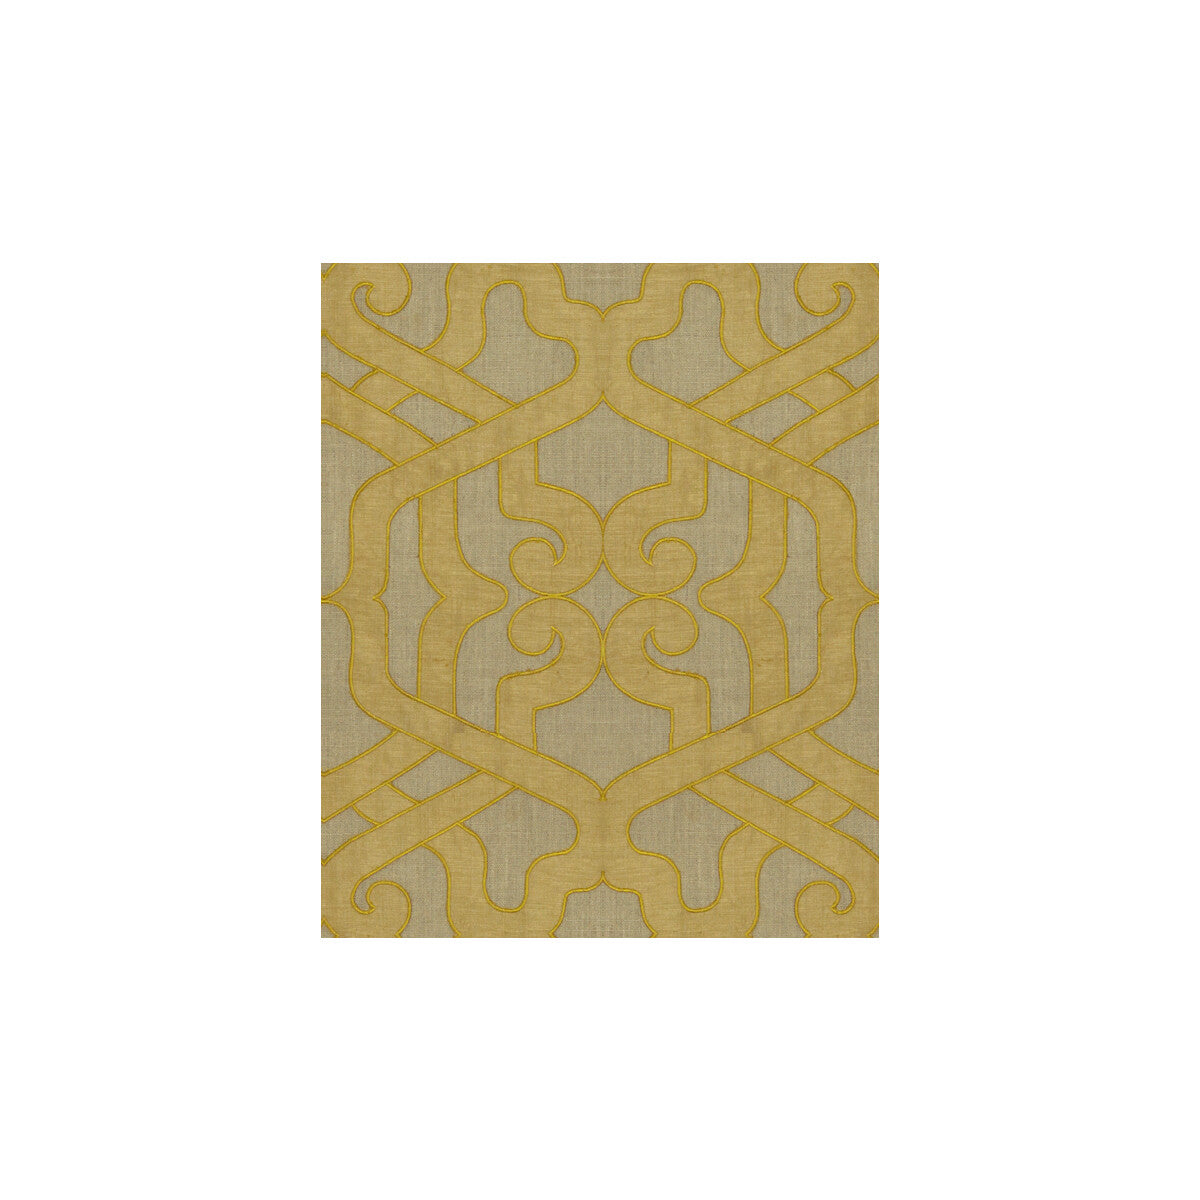 Modern Elegance fabric in saffron color - pattern 32076.14.0 - by Kravet Couture in the Modern Colors II collection